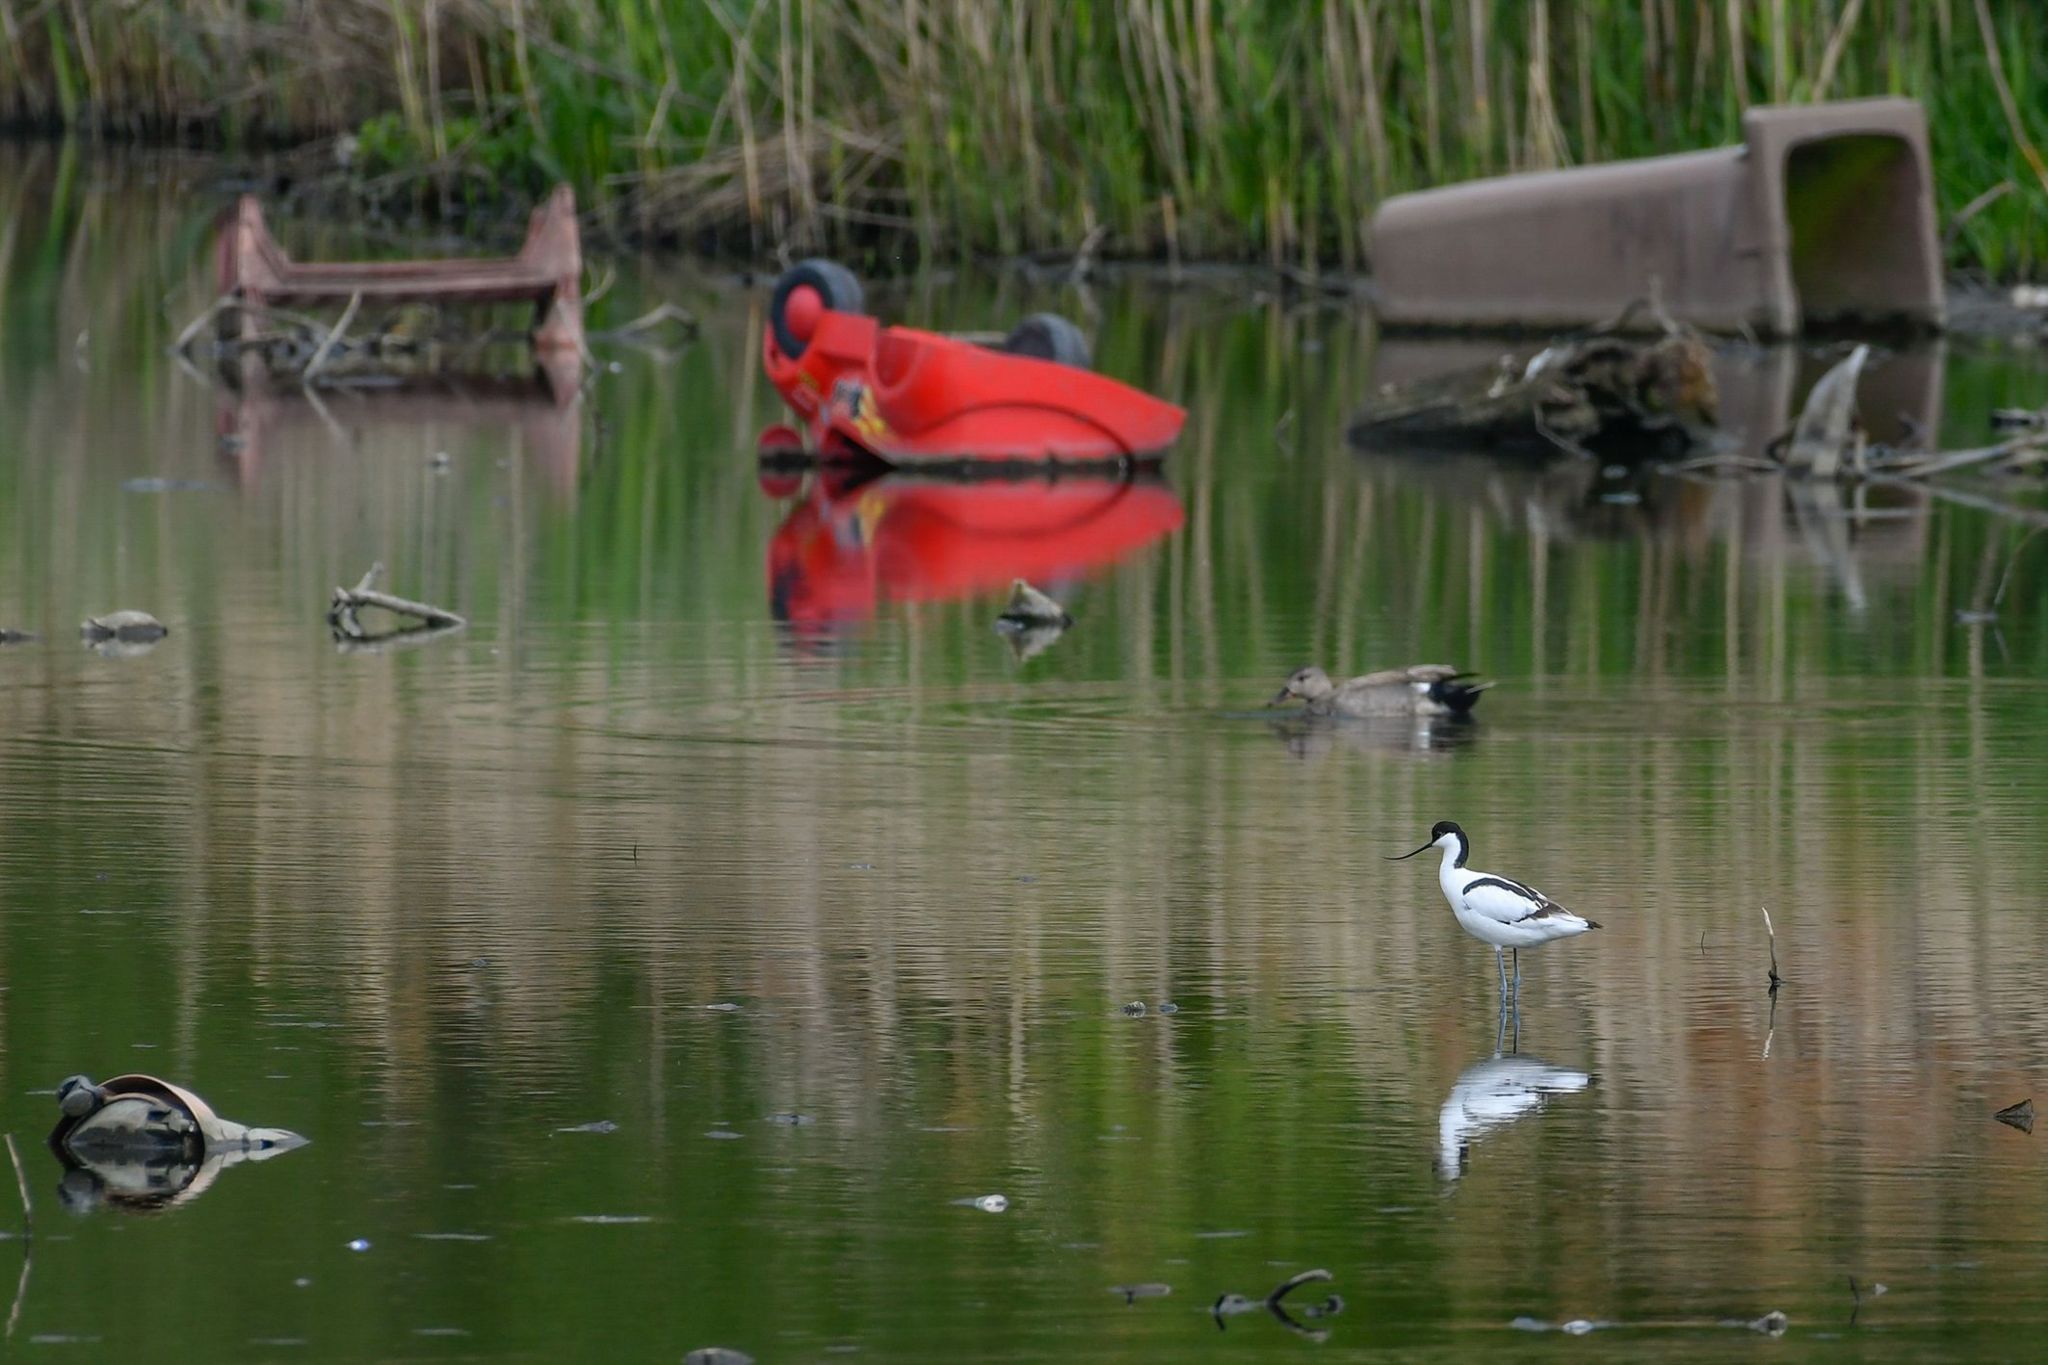 An avocet wades among the rubbish that can be seen in the drained reservoir